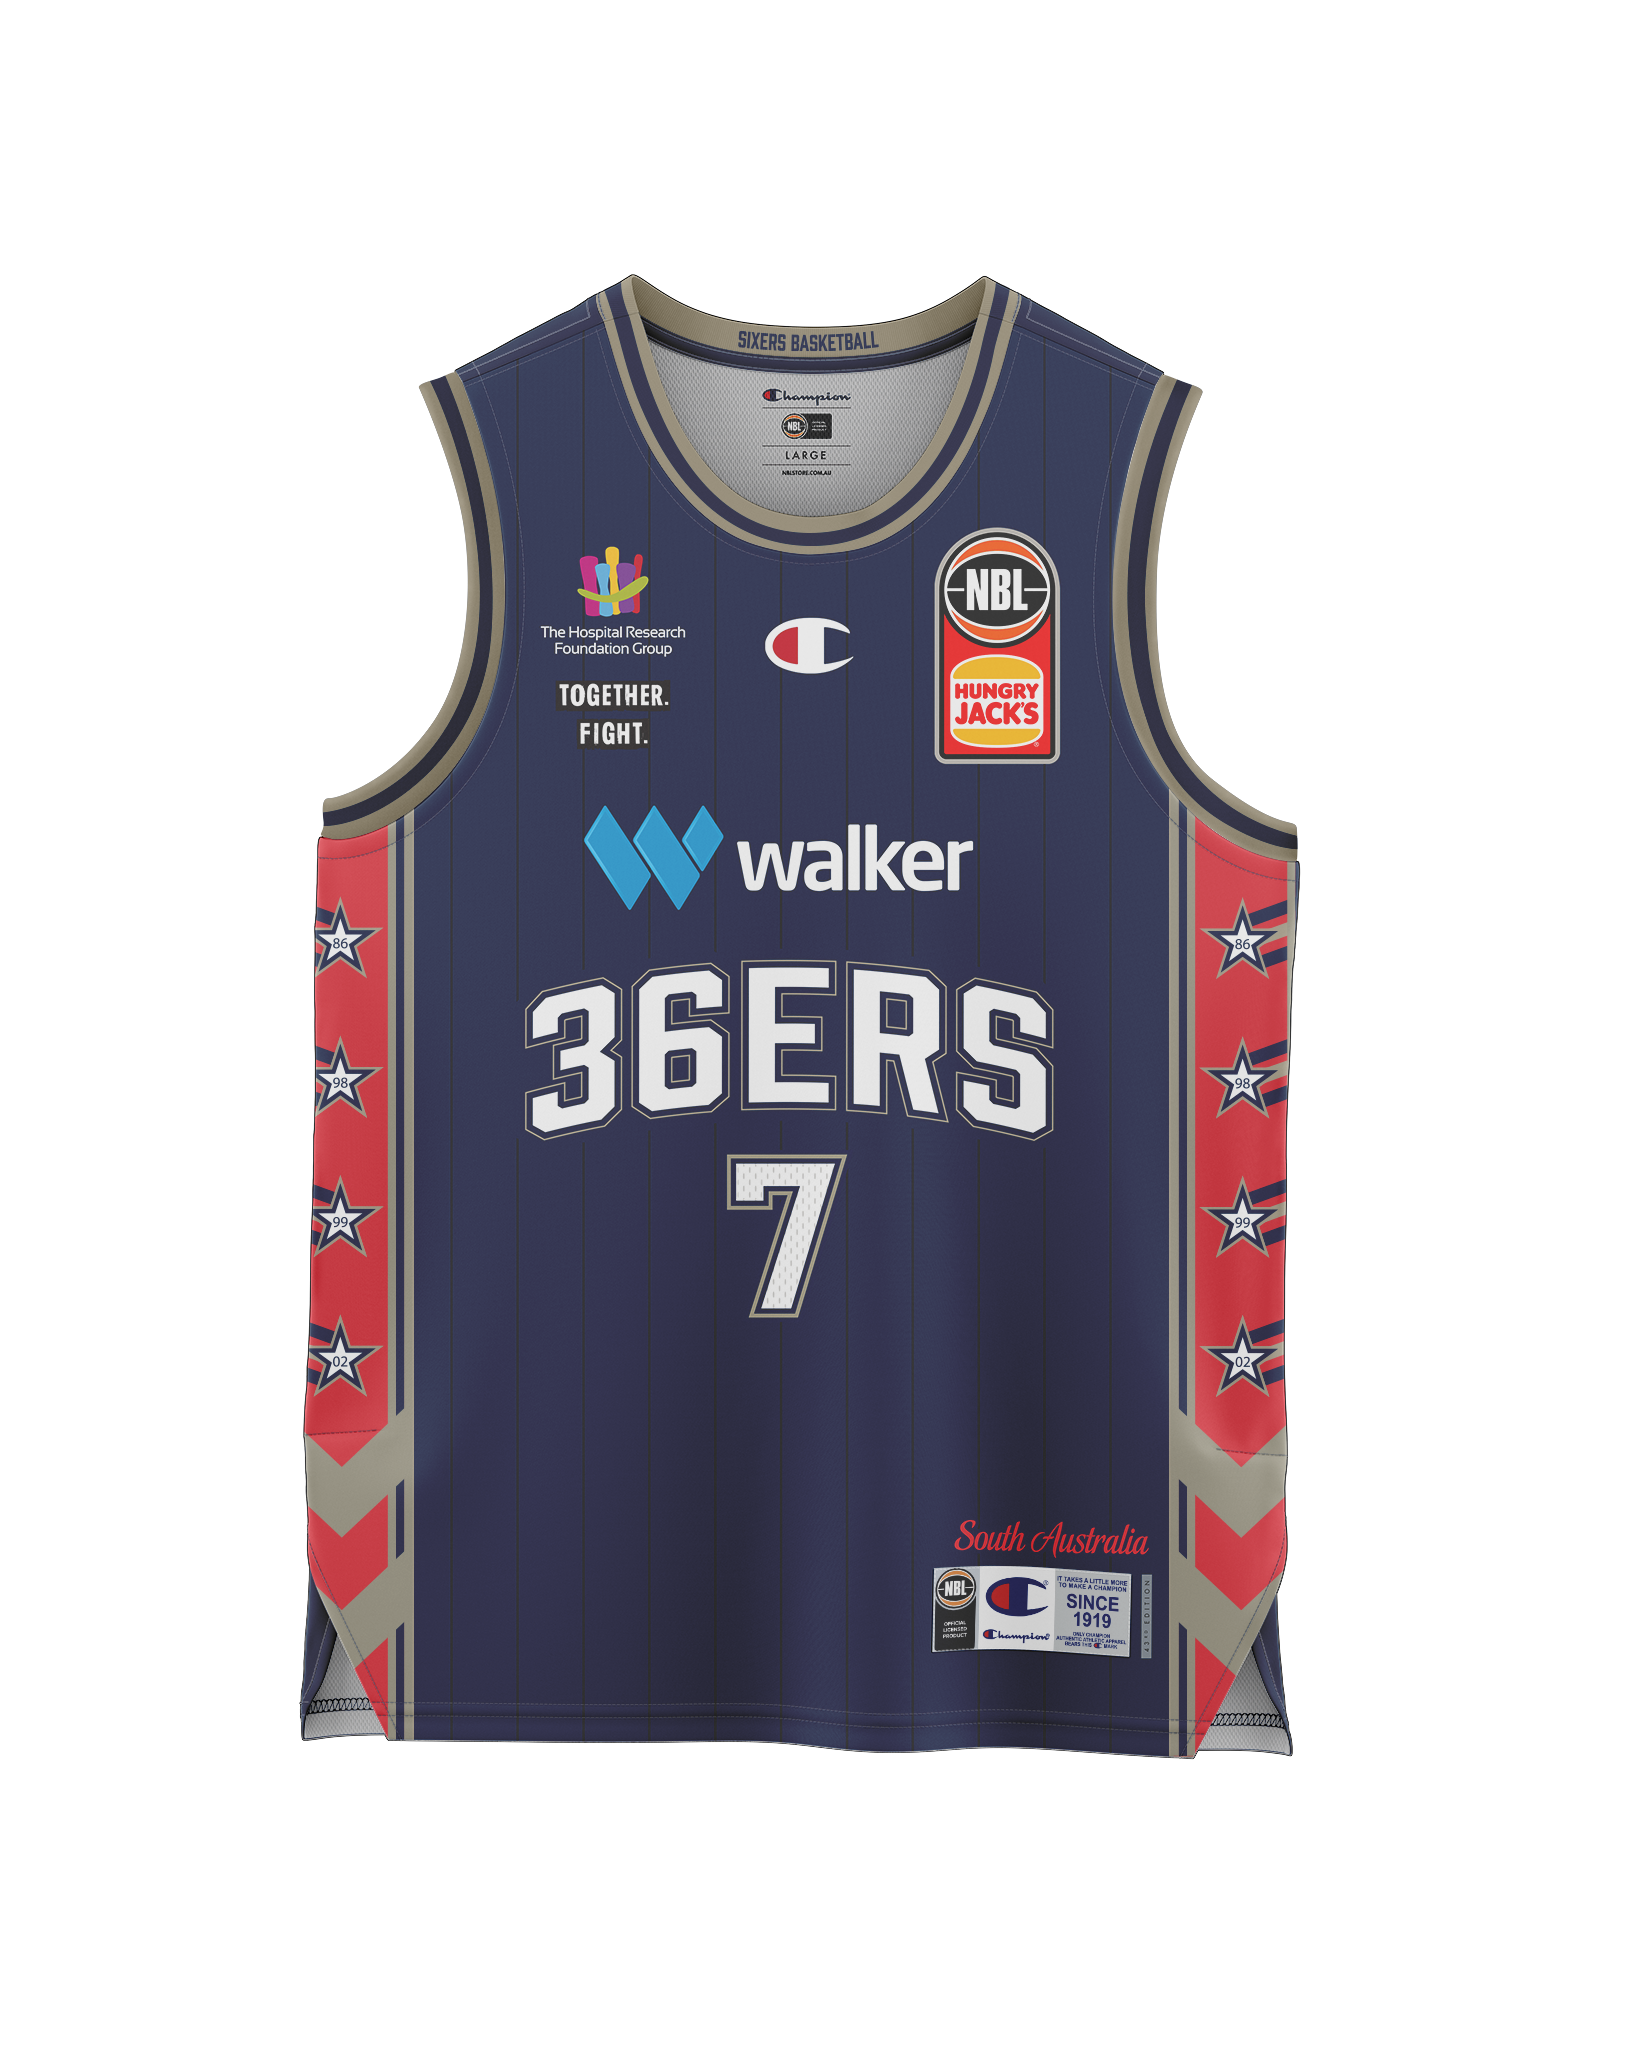 Adelaide 36ers 2021/22 Authentic Adult Home Jersey - Mojave King - Adelaide 36ers